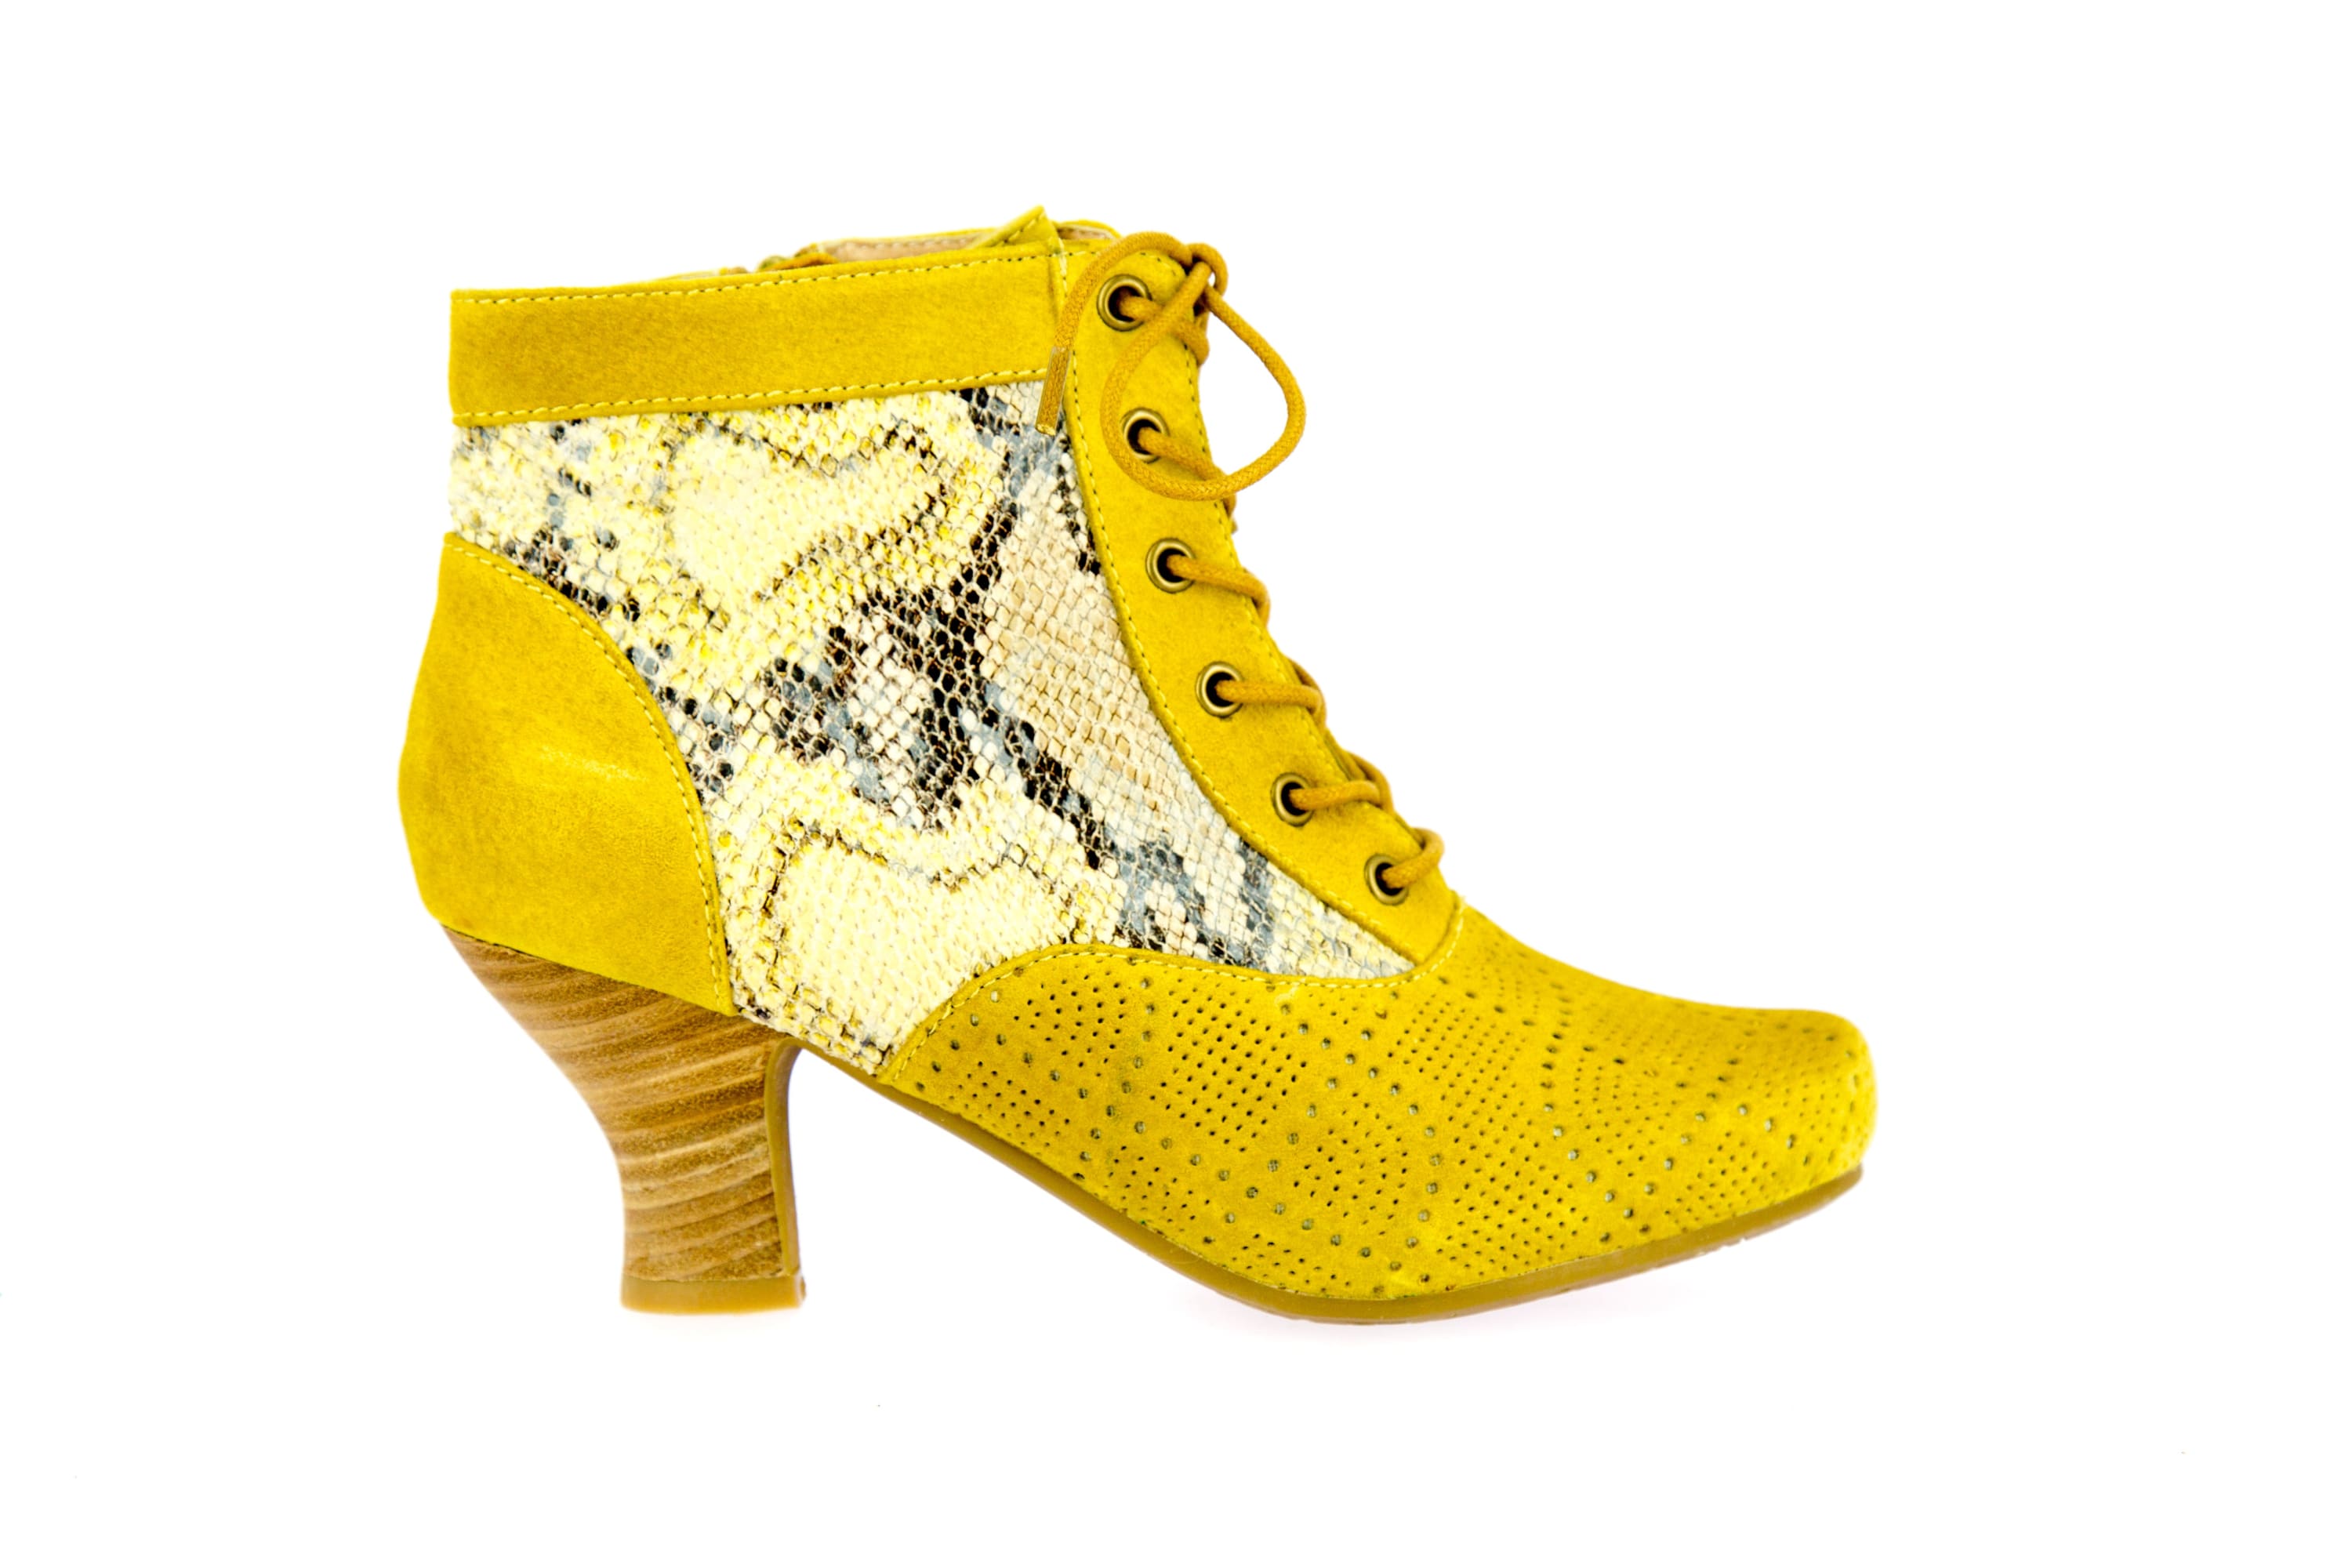 CANDICE 08 shoes - 35 / Yellow - Boots